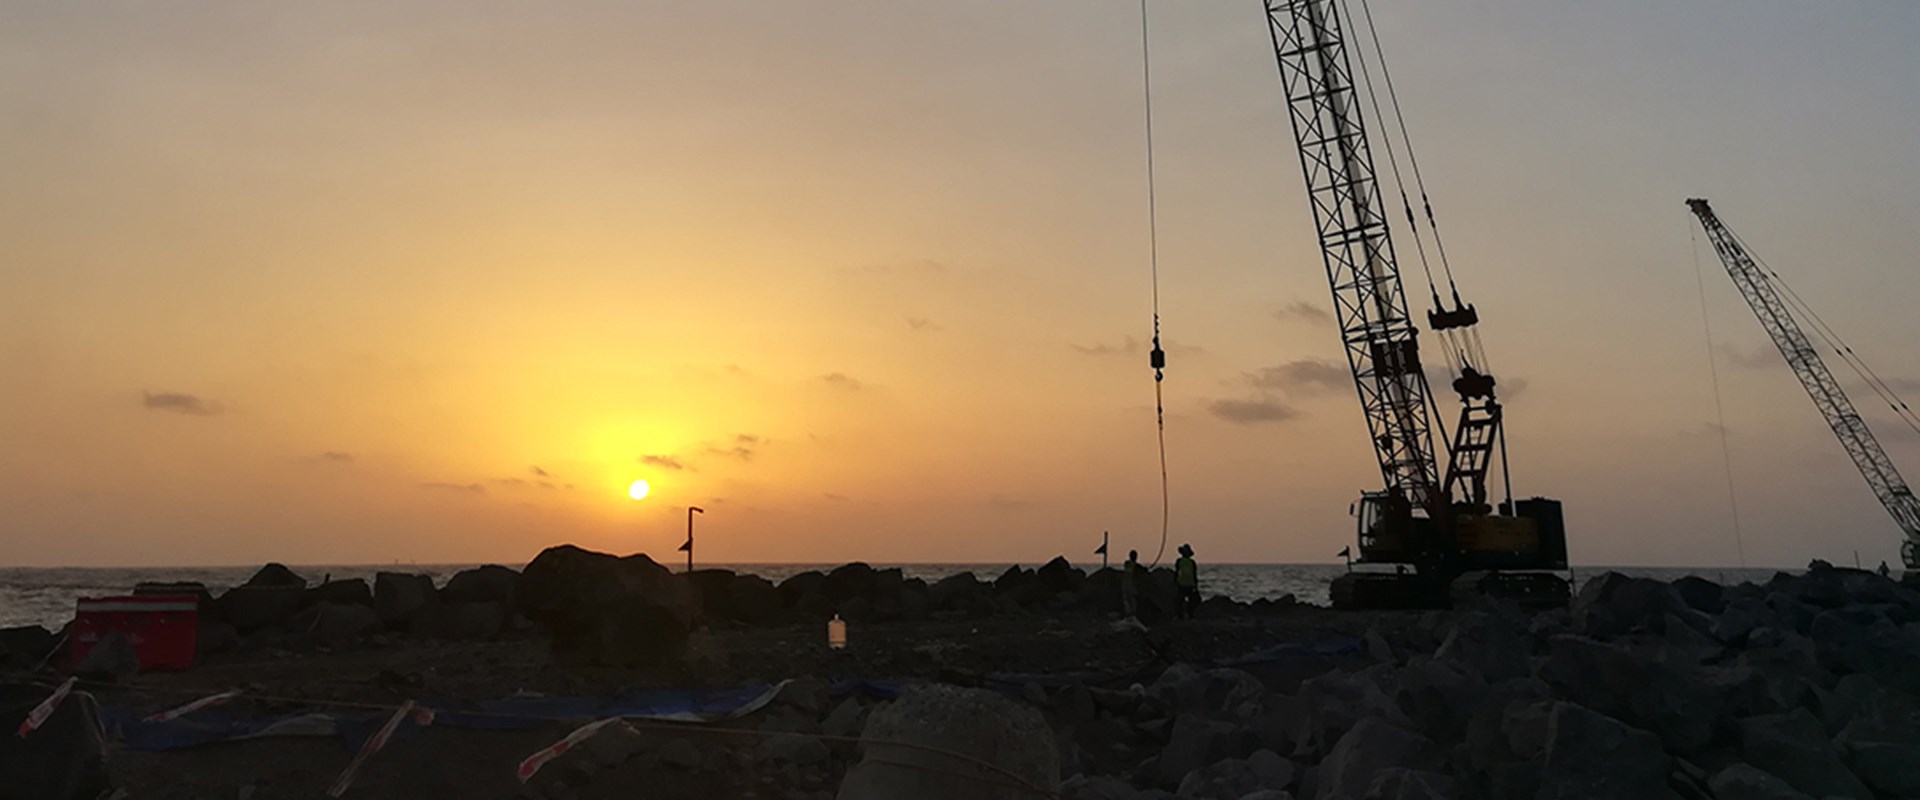 Construction crane in sunset silhouette